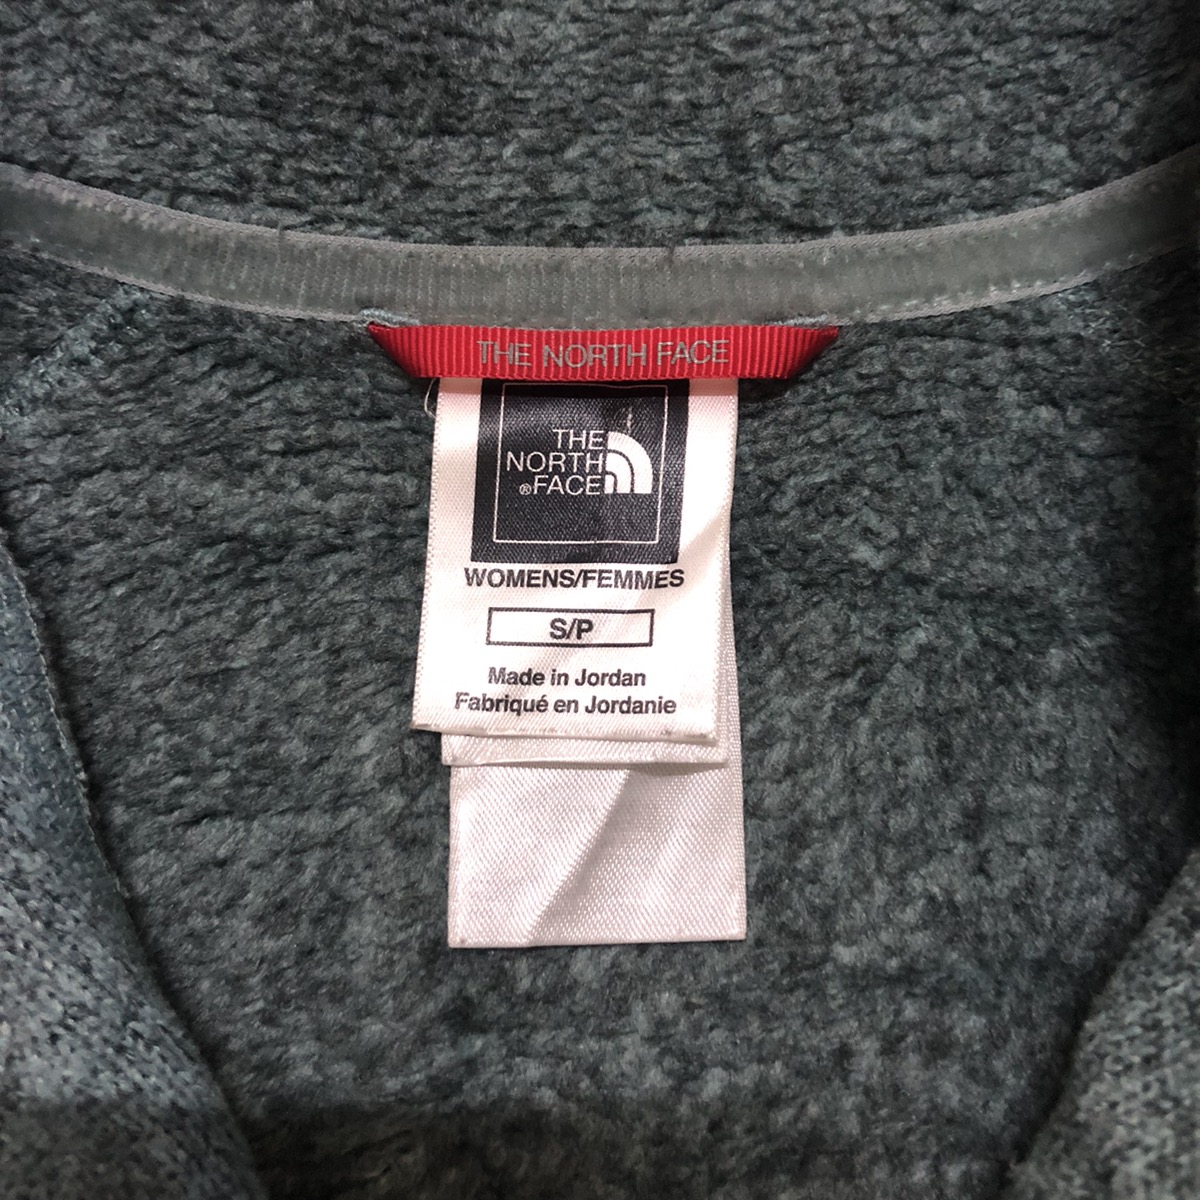 The North Face sweater fleece 1/4 toggle button - 6